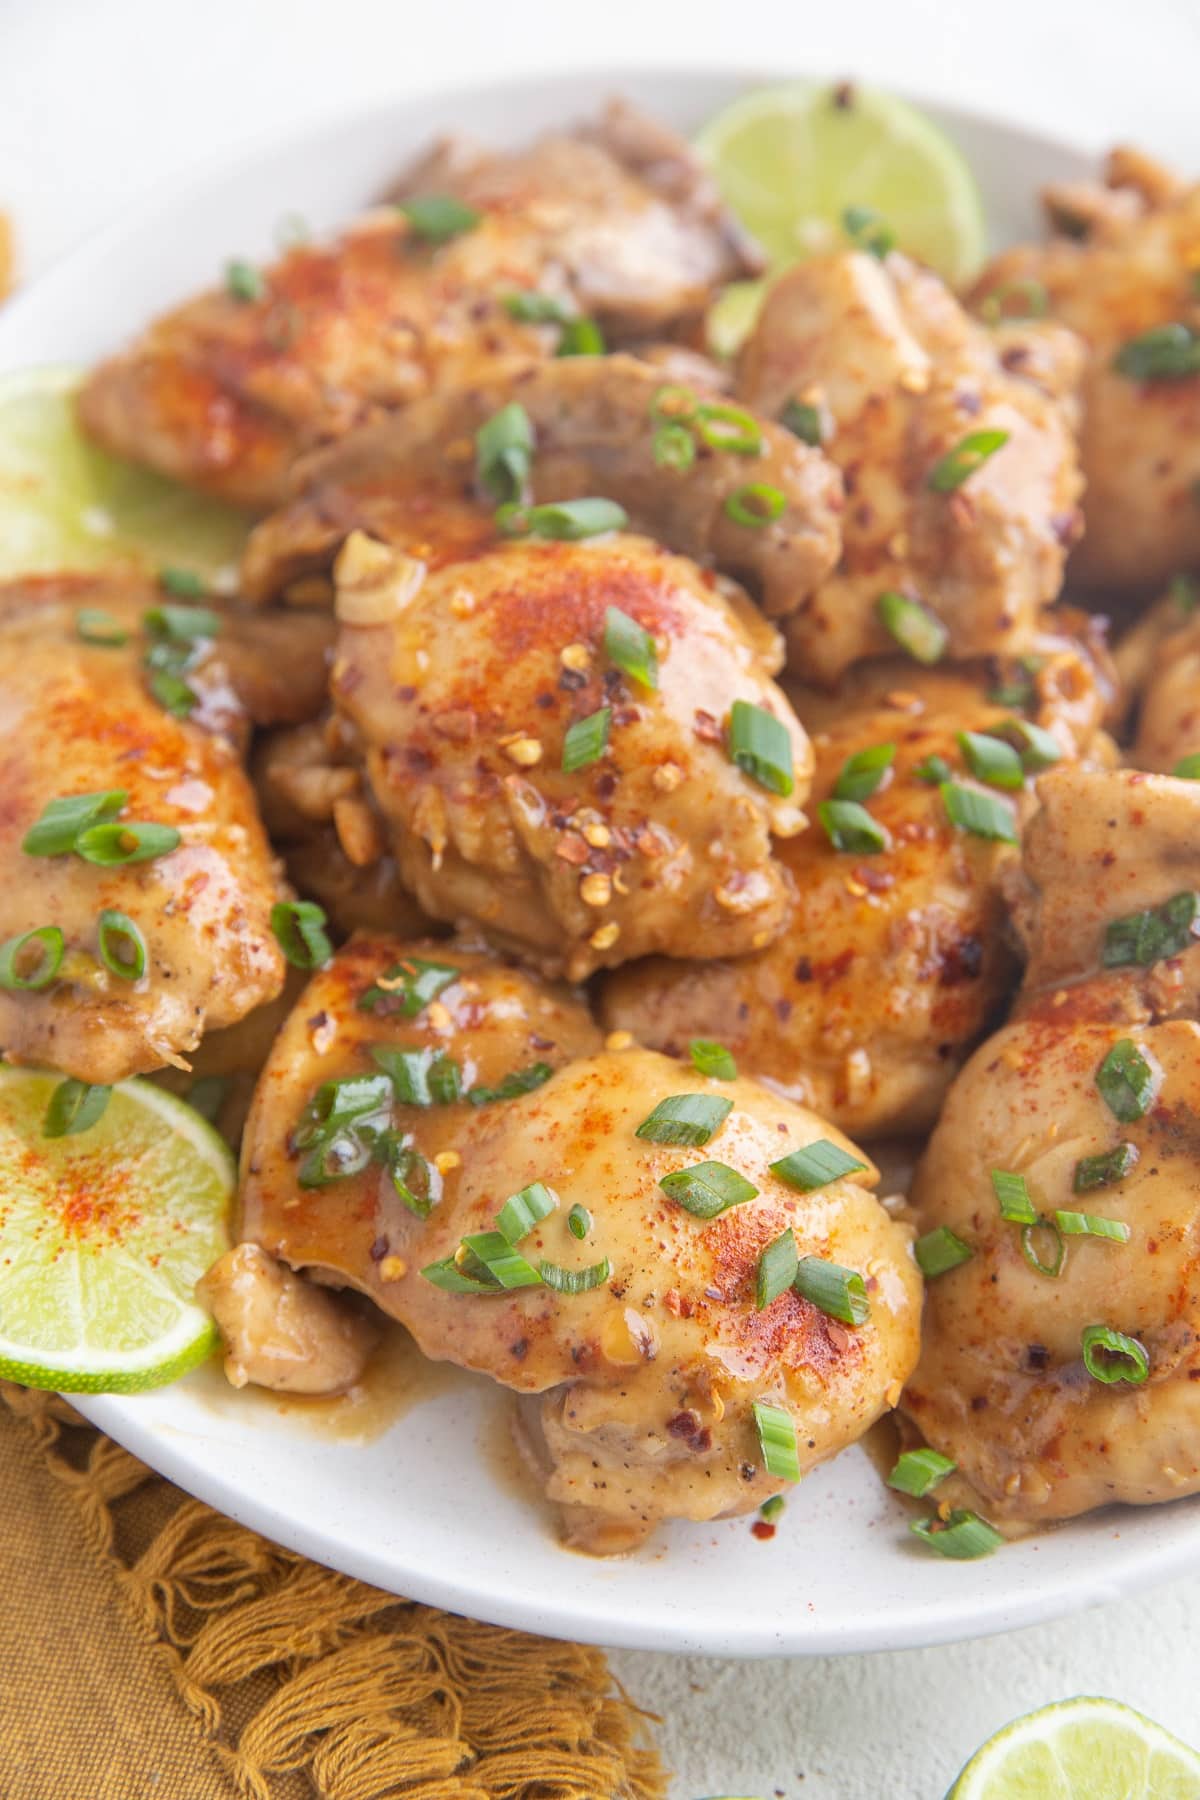 Plate of Asian-inspired chicken thighs, sprinkled with green onion with limes to the side.